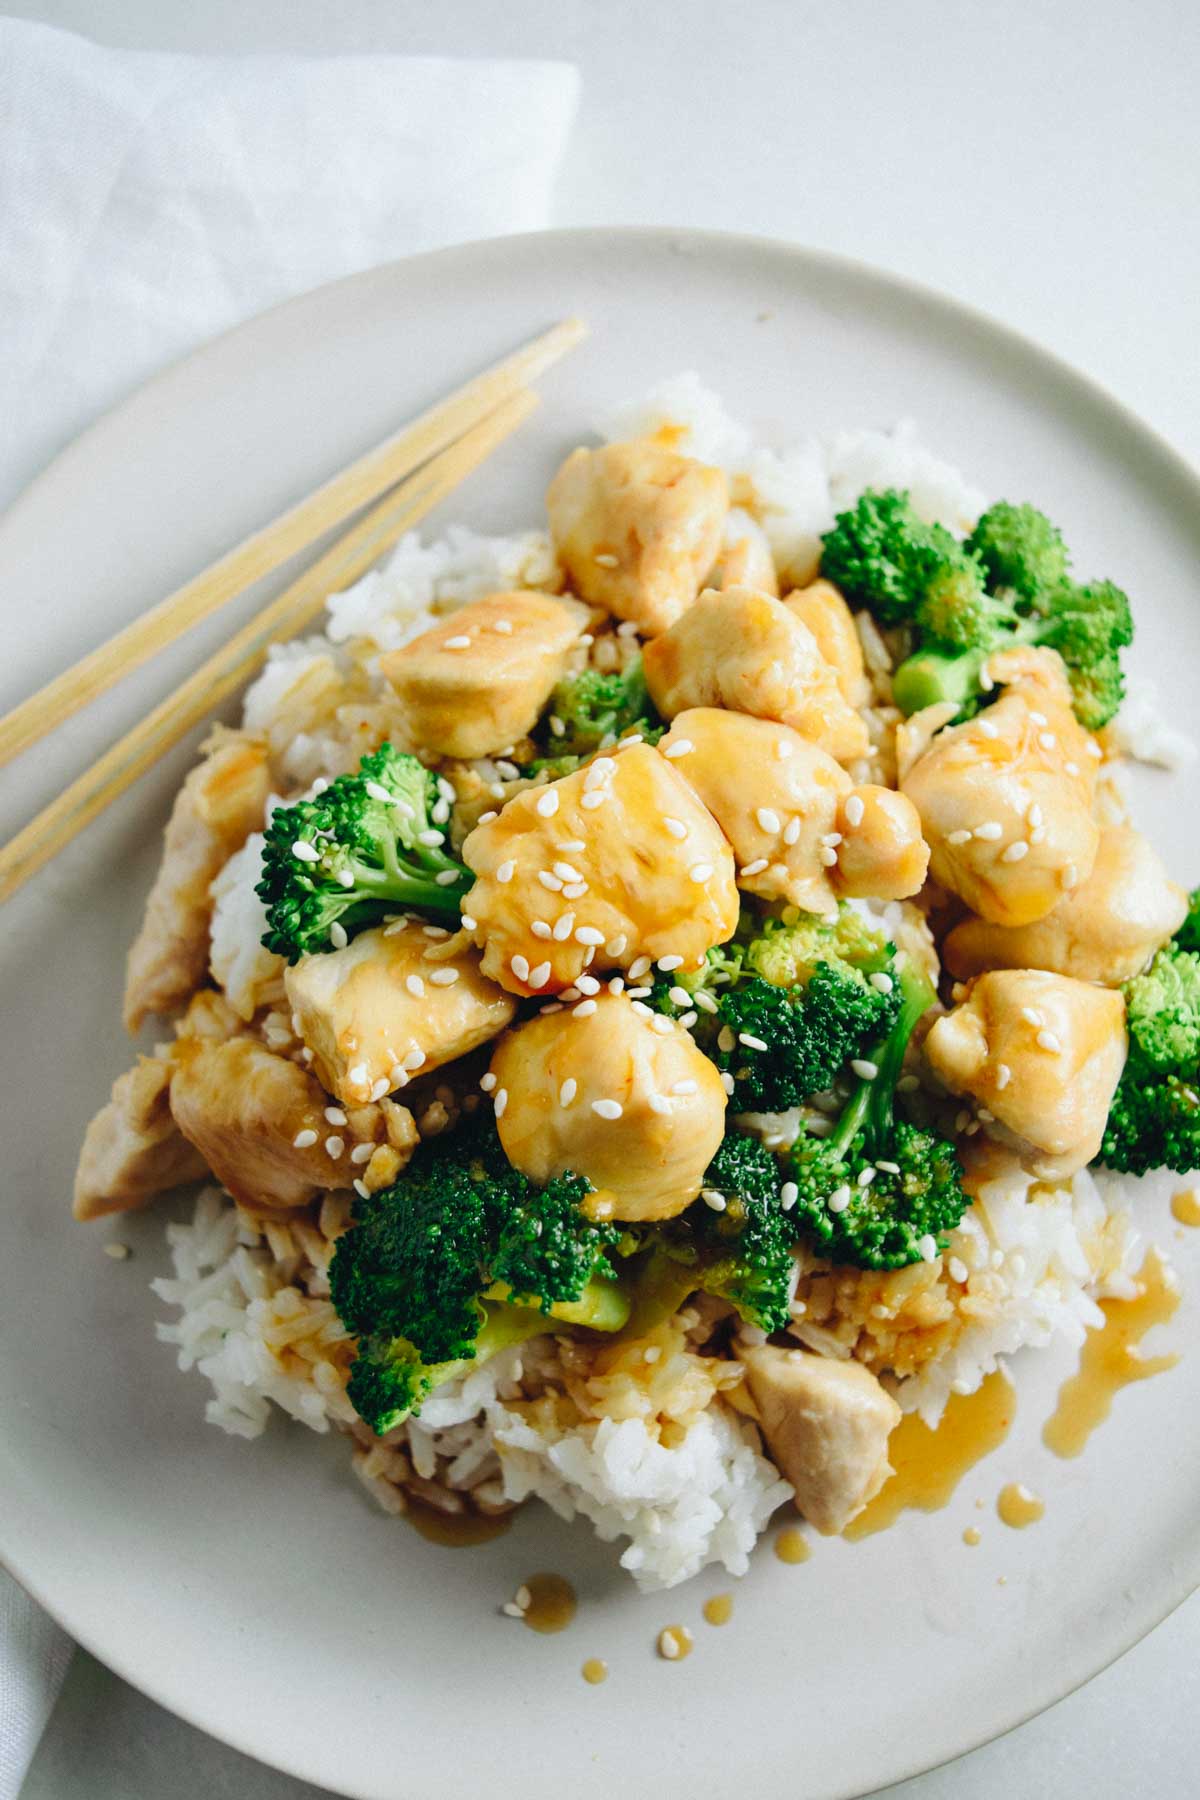 Gluten-free healthy orange chicken on a plate with broccoli and rice